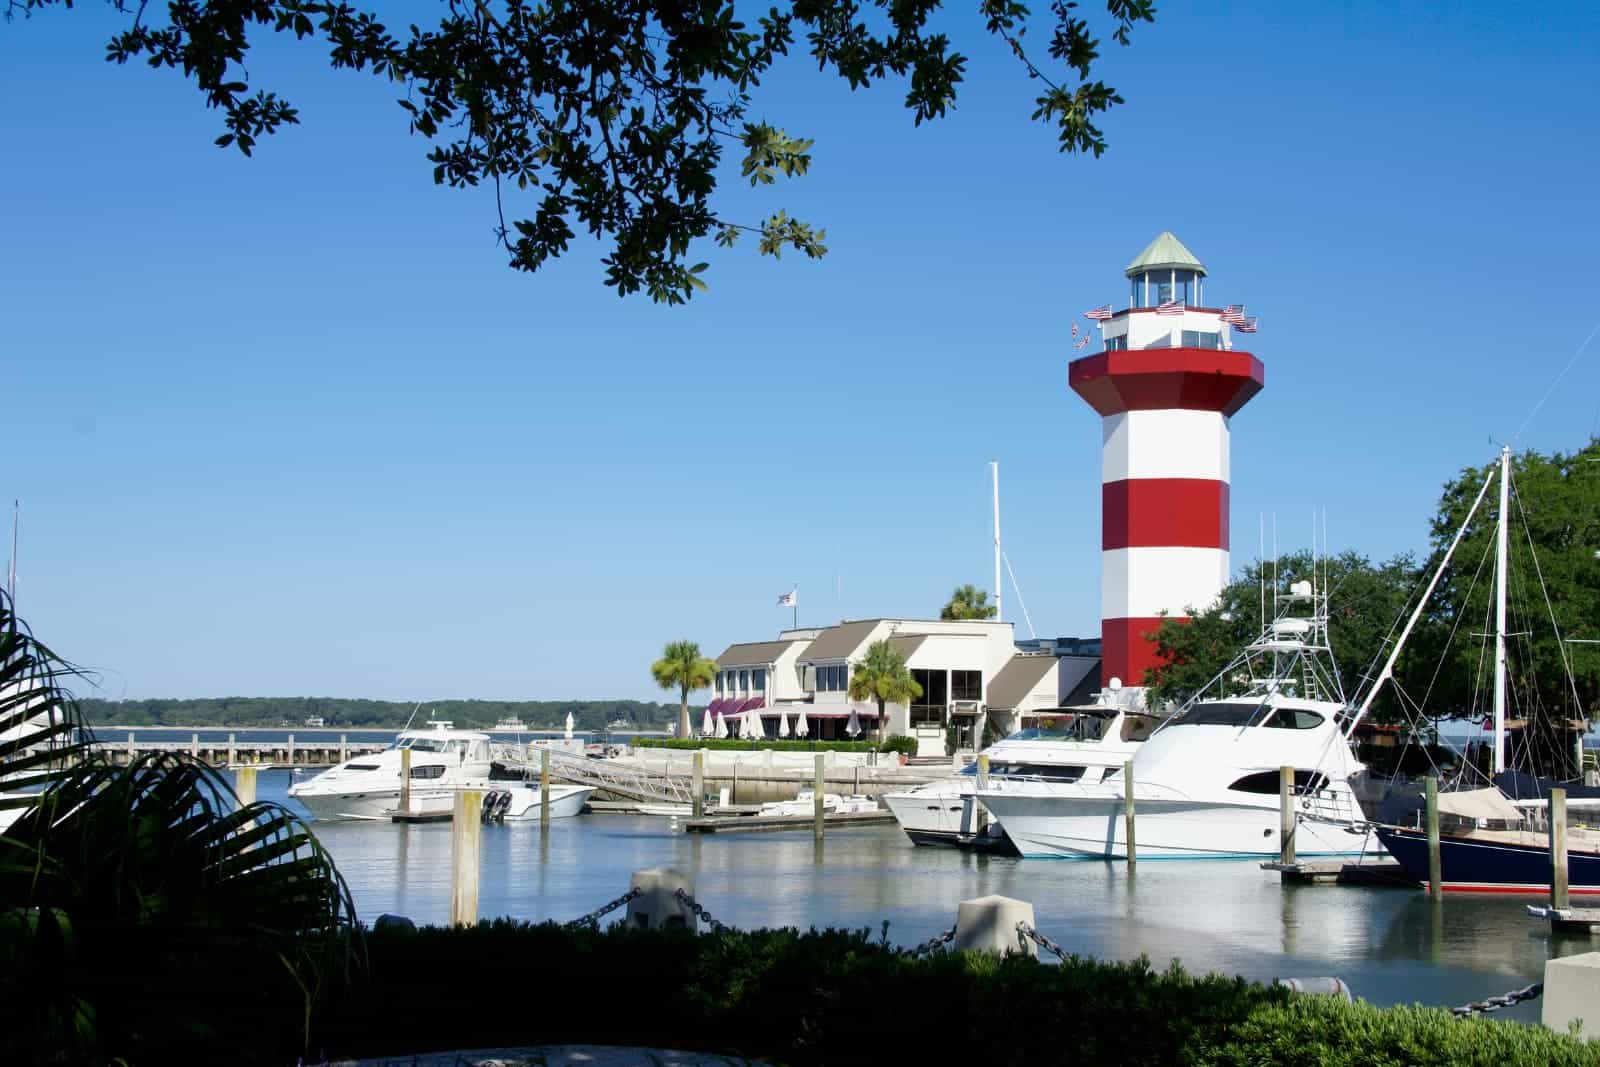 Harbour Town Lighthouse on Hilton Head Island, South Carolina. The red and white striped lighthouse is against a blue, cloudless sky and it towers above sailboats and yachts in clear blue water..